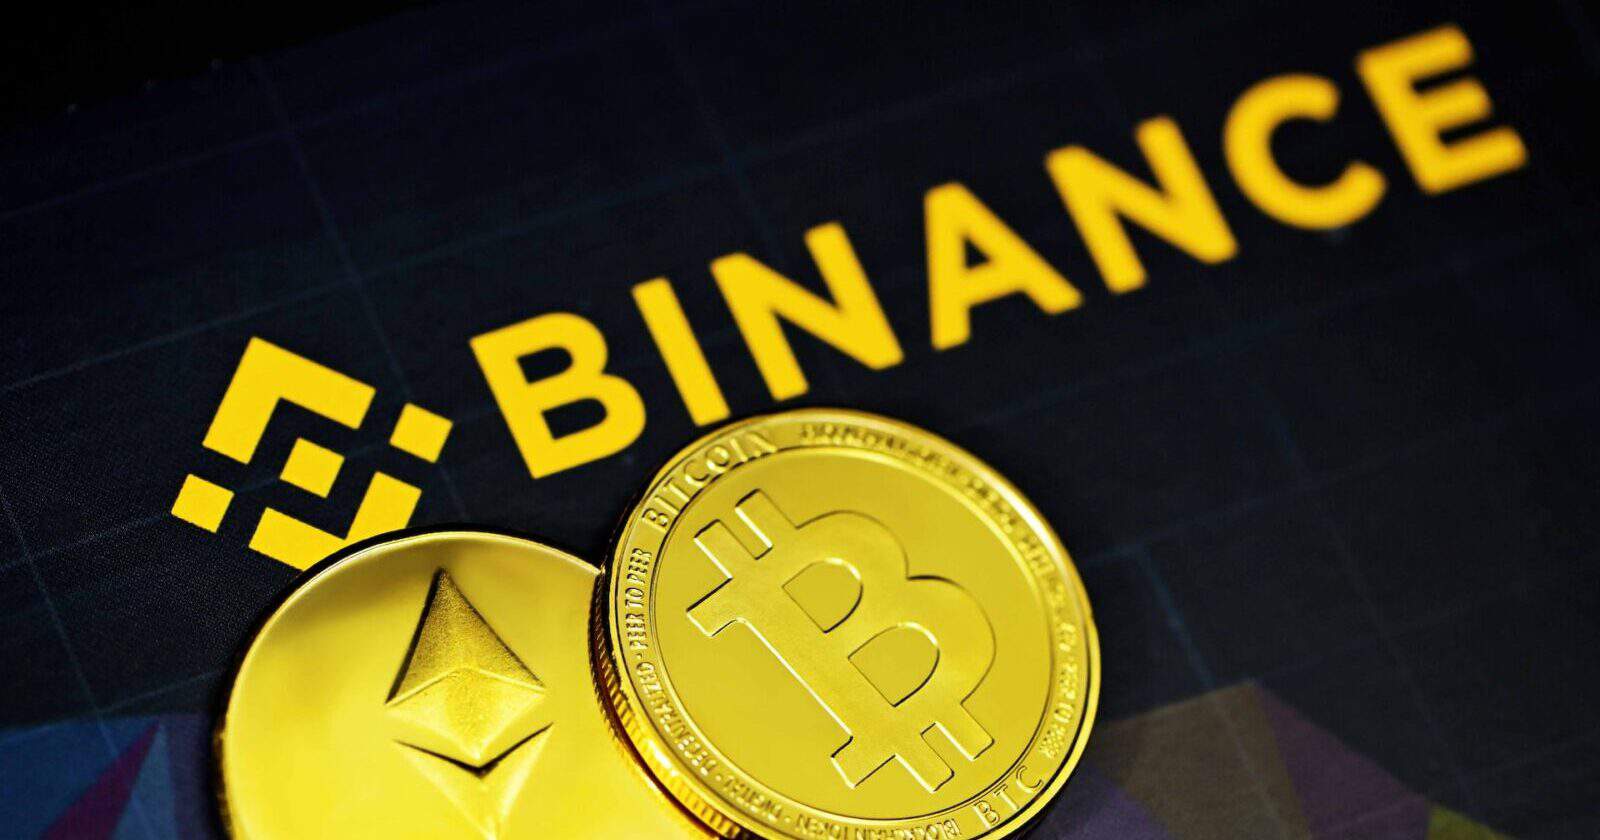 Binance Launches Zero-Free Bitcoin and Ethereum Trading Pair For FDUSD